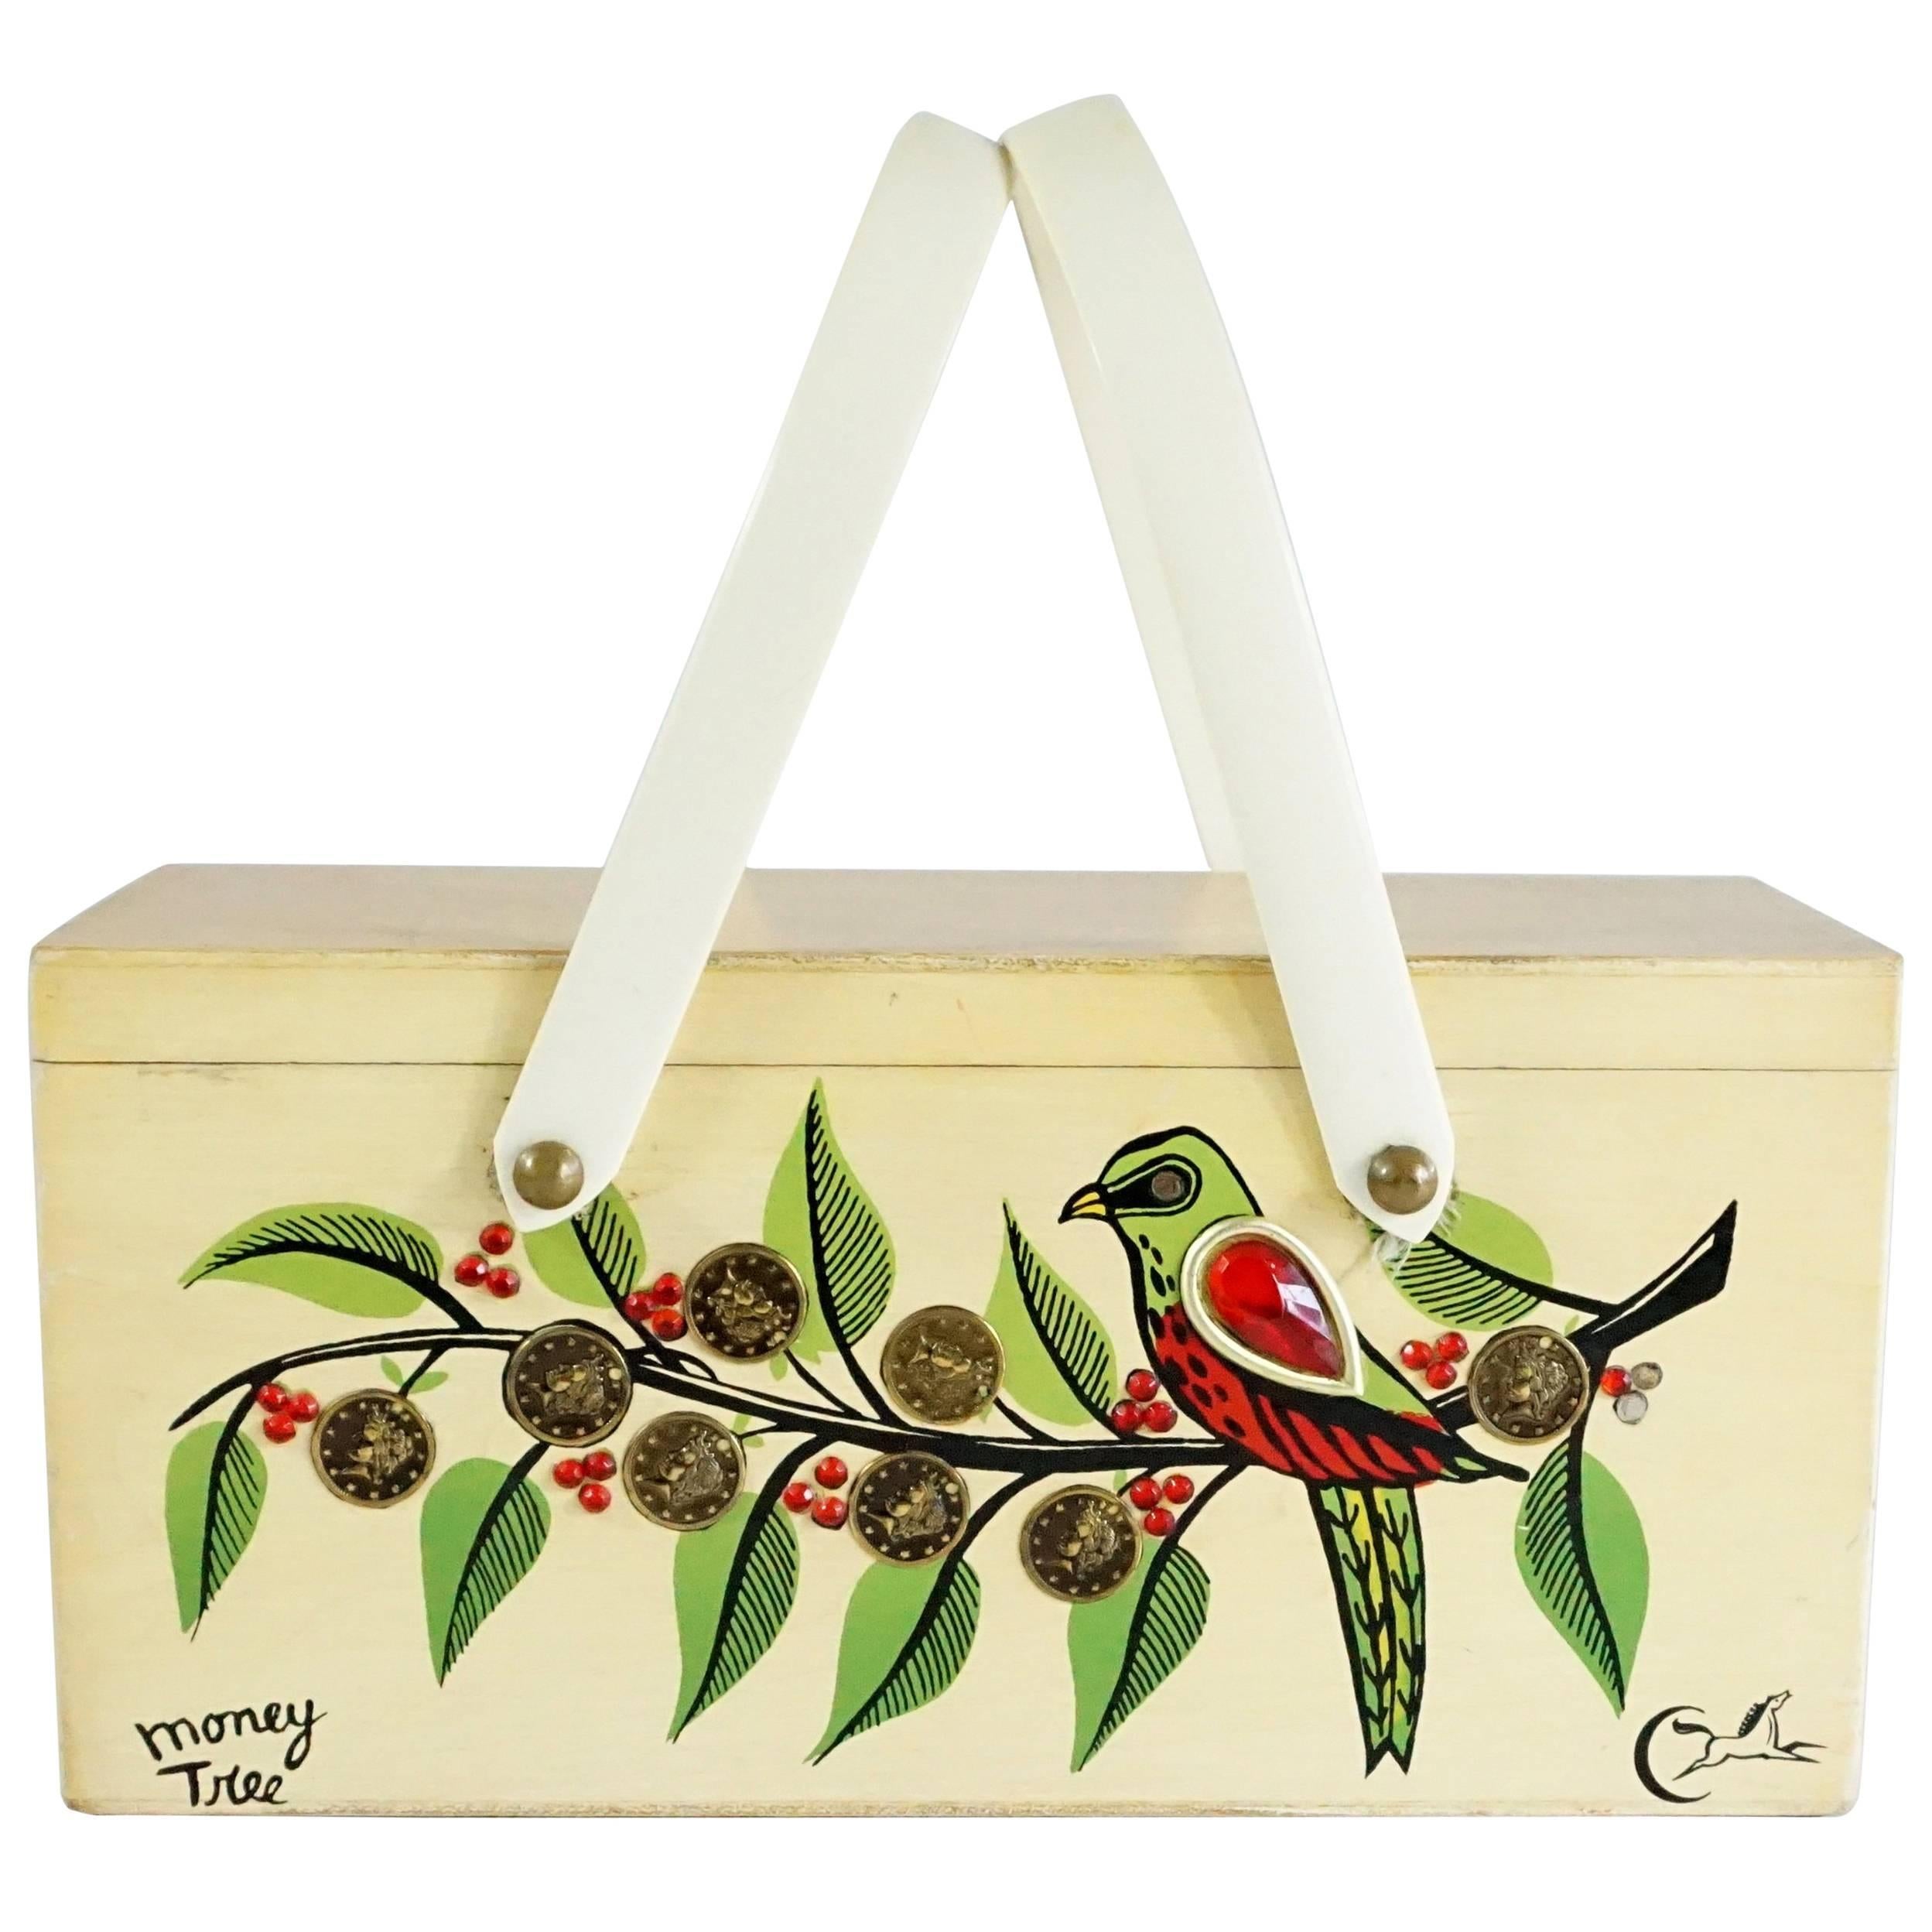 Enid Collins Beige Wood "Money Tree" Painted Bag with Coins - 1960's For Sale